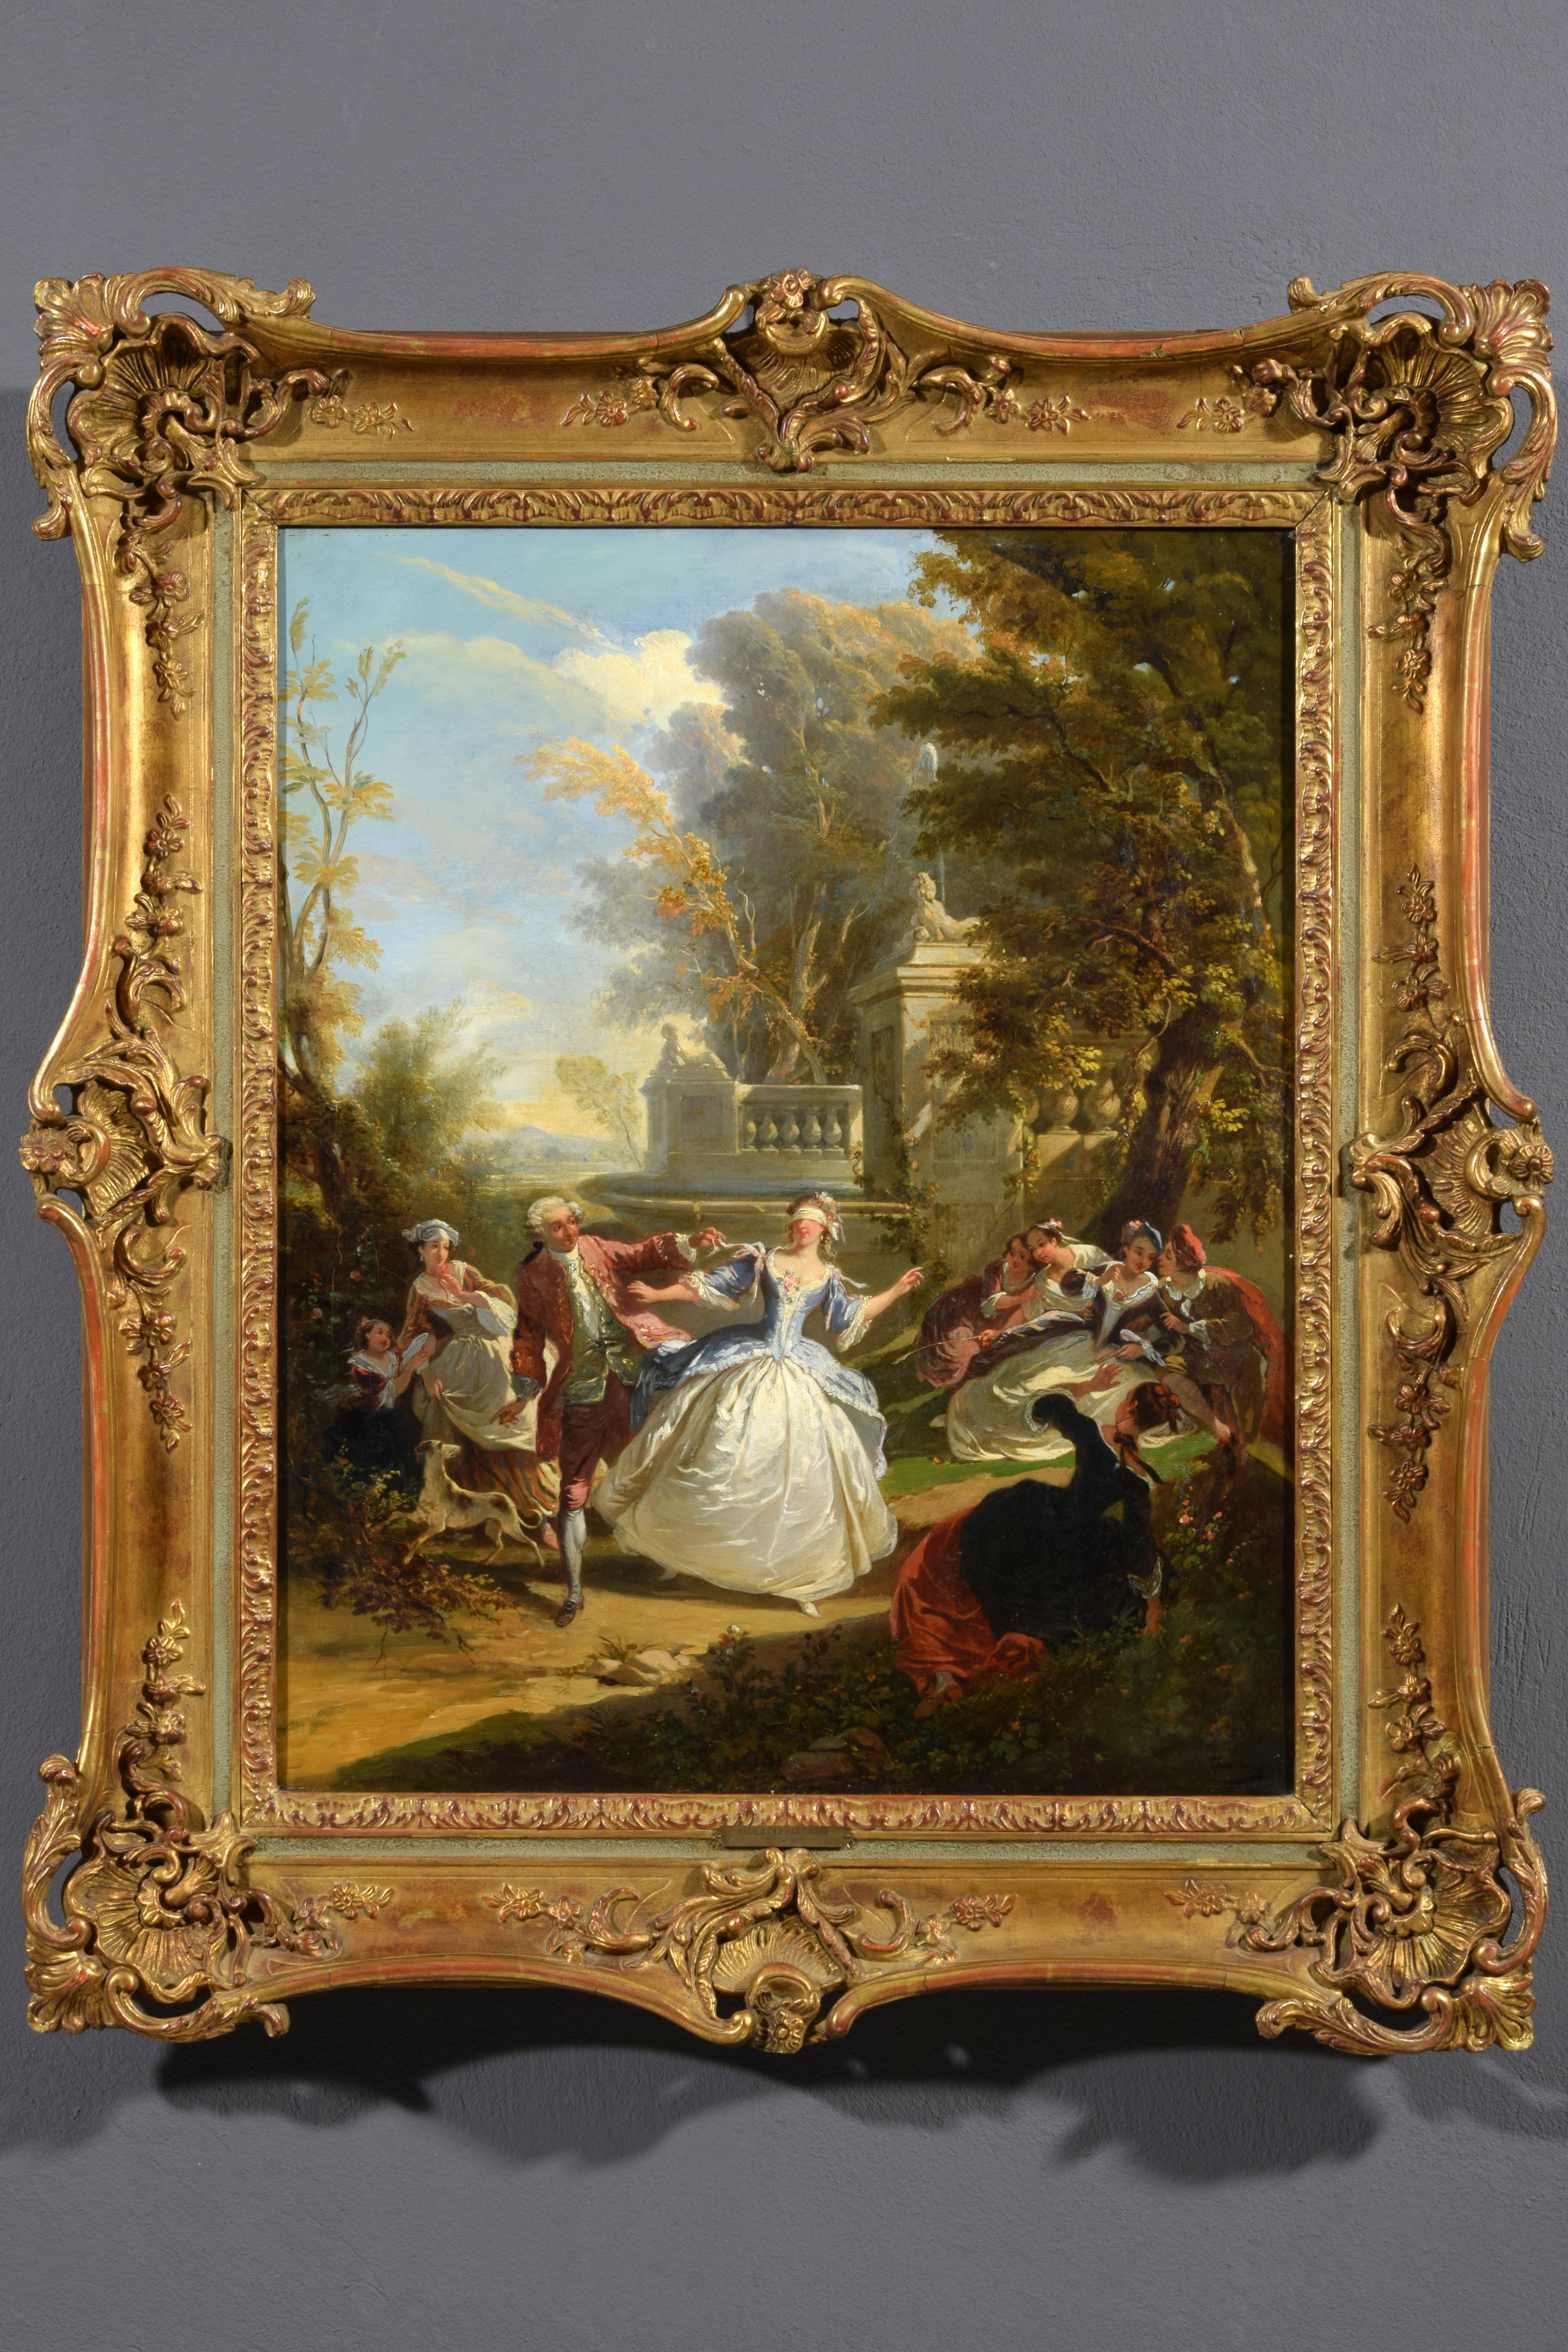 Nicolas Edward Gabe (Paris, 1814-1865)
Blind man's bluff
Oil on canvas, cm L 72 x W 58 (without frame); with frame cm H 98 x W 84 x D 8
The painting, made in oil on canvas, depicts some nobles in eighteenth-century clothes playing Blind man's bluff